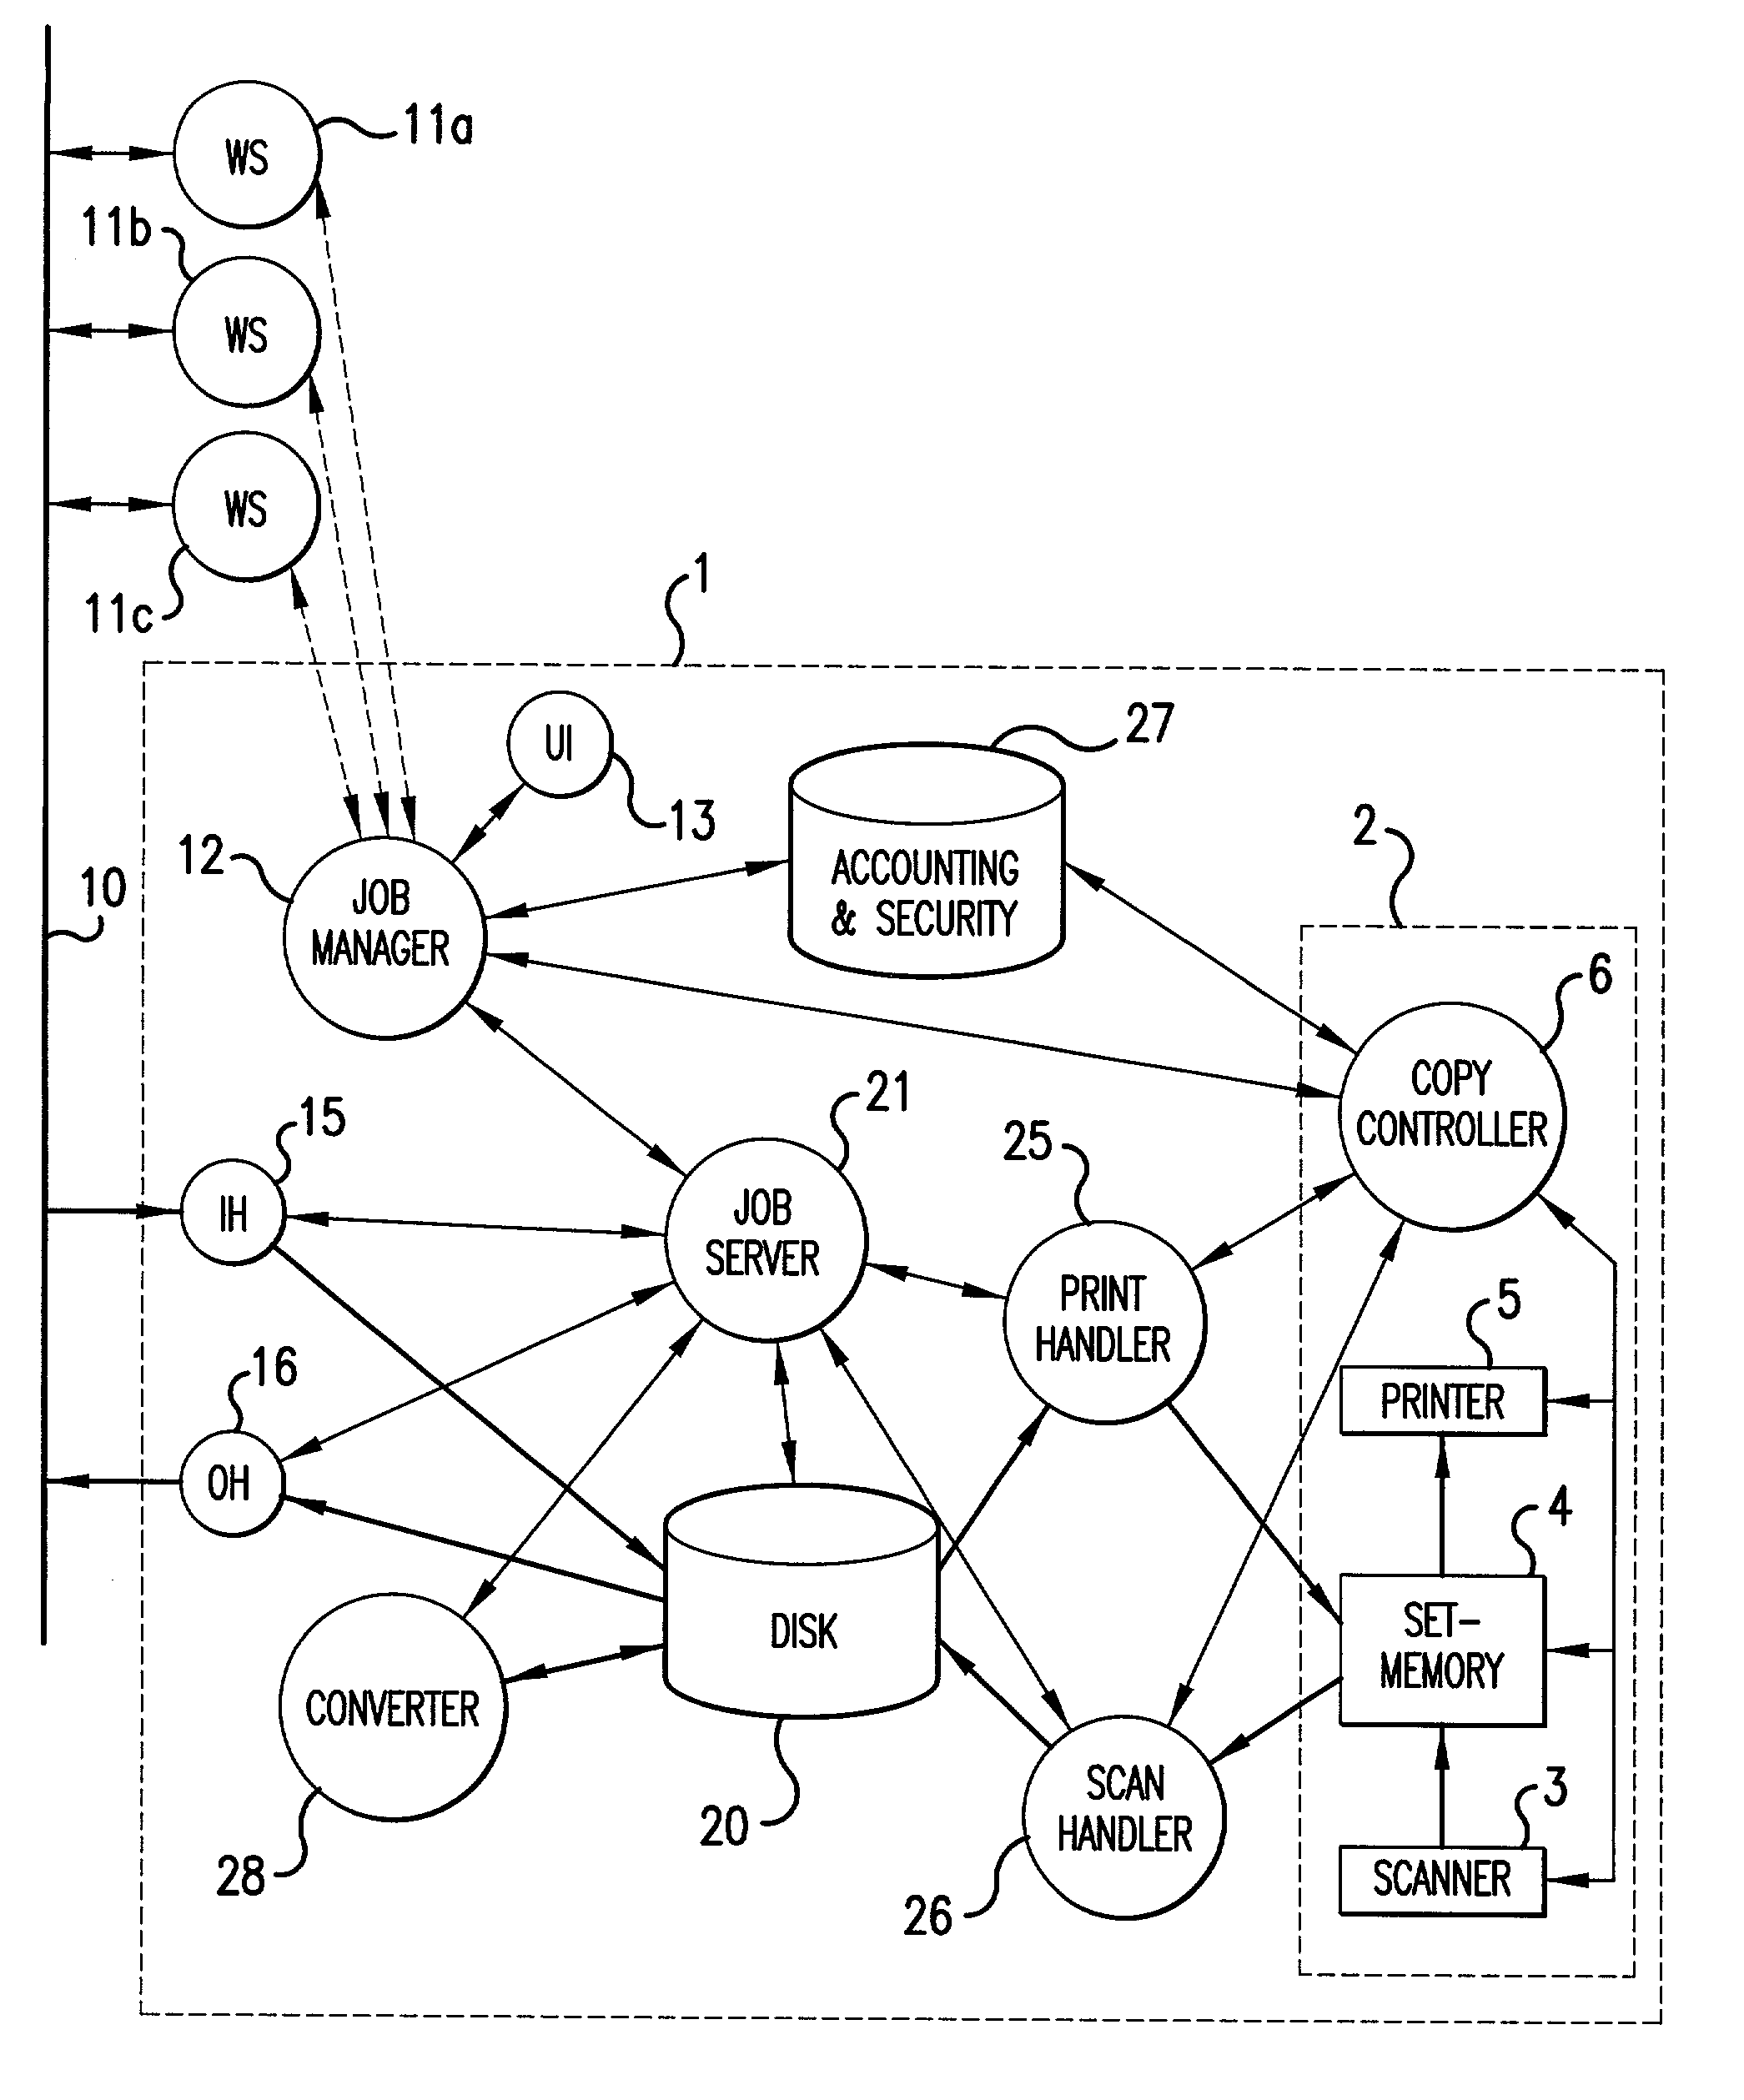 Scan and print processing in a network system having a plurality of devices